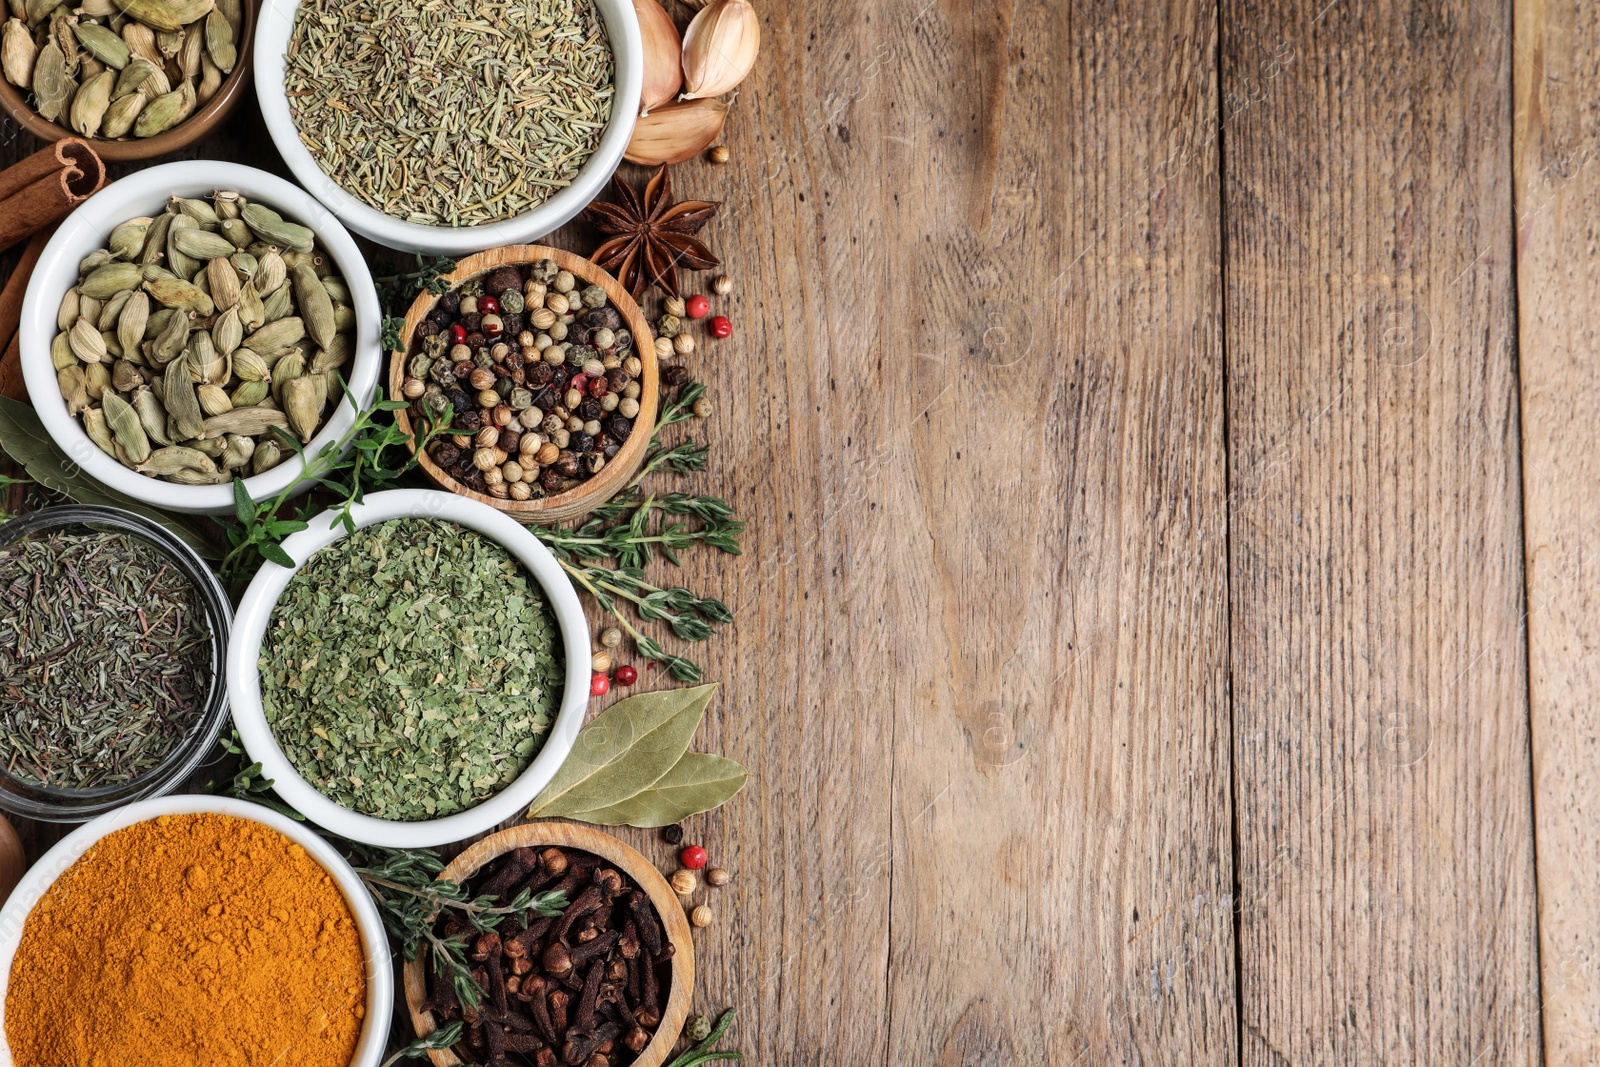 Photo of Flat lay composition with different natural spices and herbs on wooden table, space for text